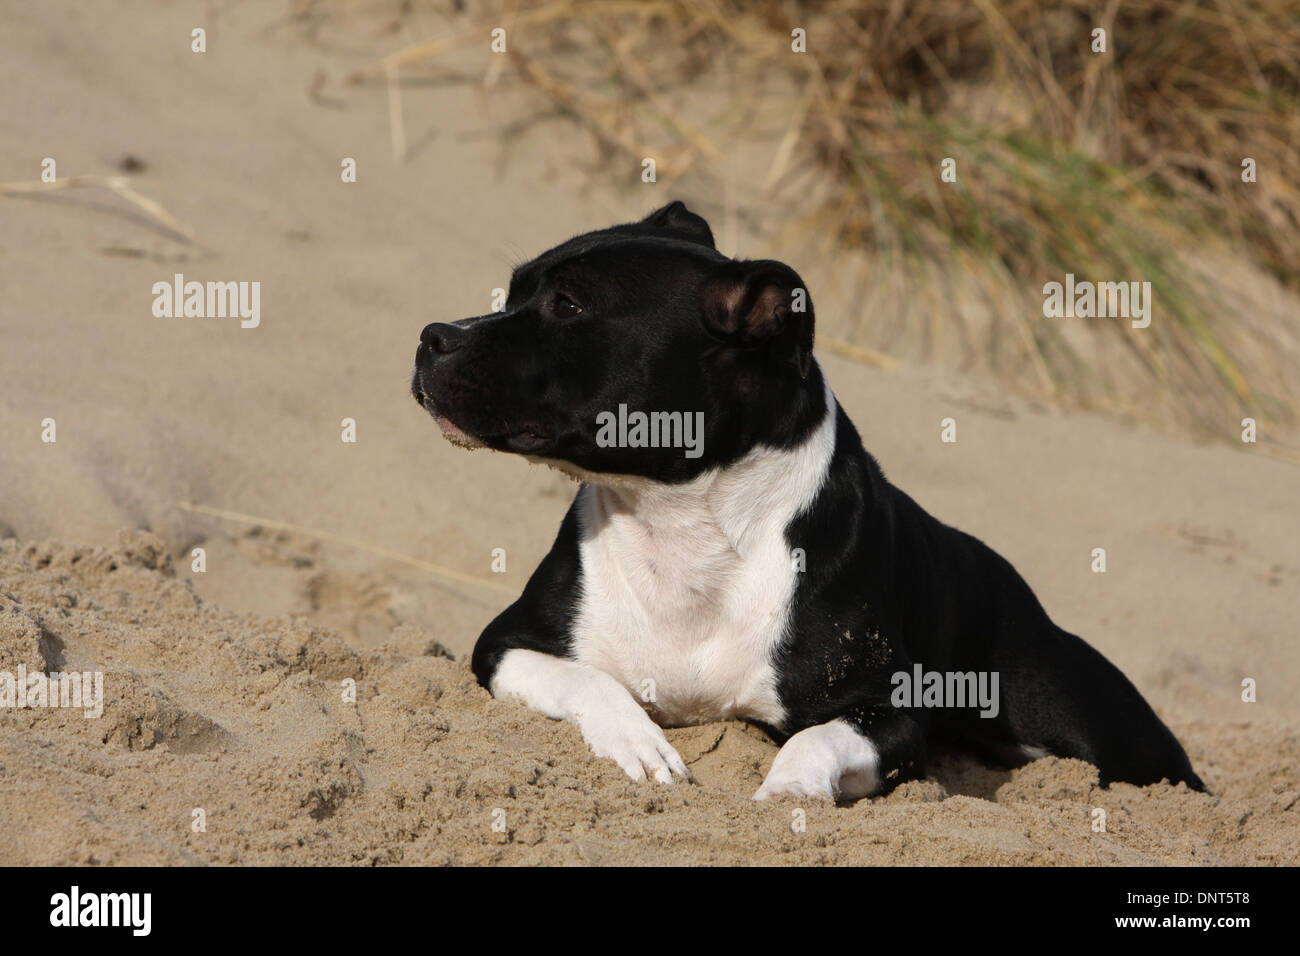 dog Staffordshire Bull Terrier / Staffie  adult lying on the sand Stock Photo